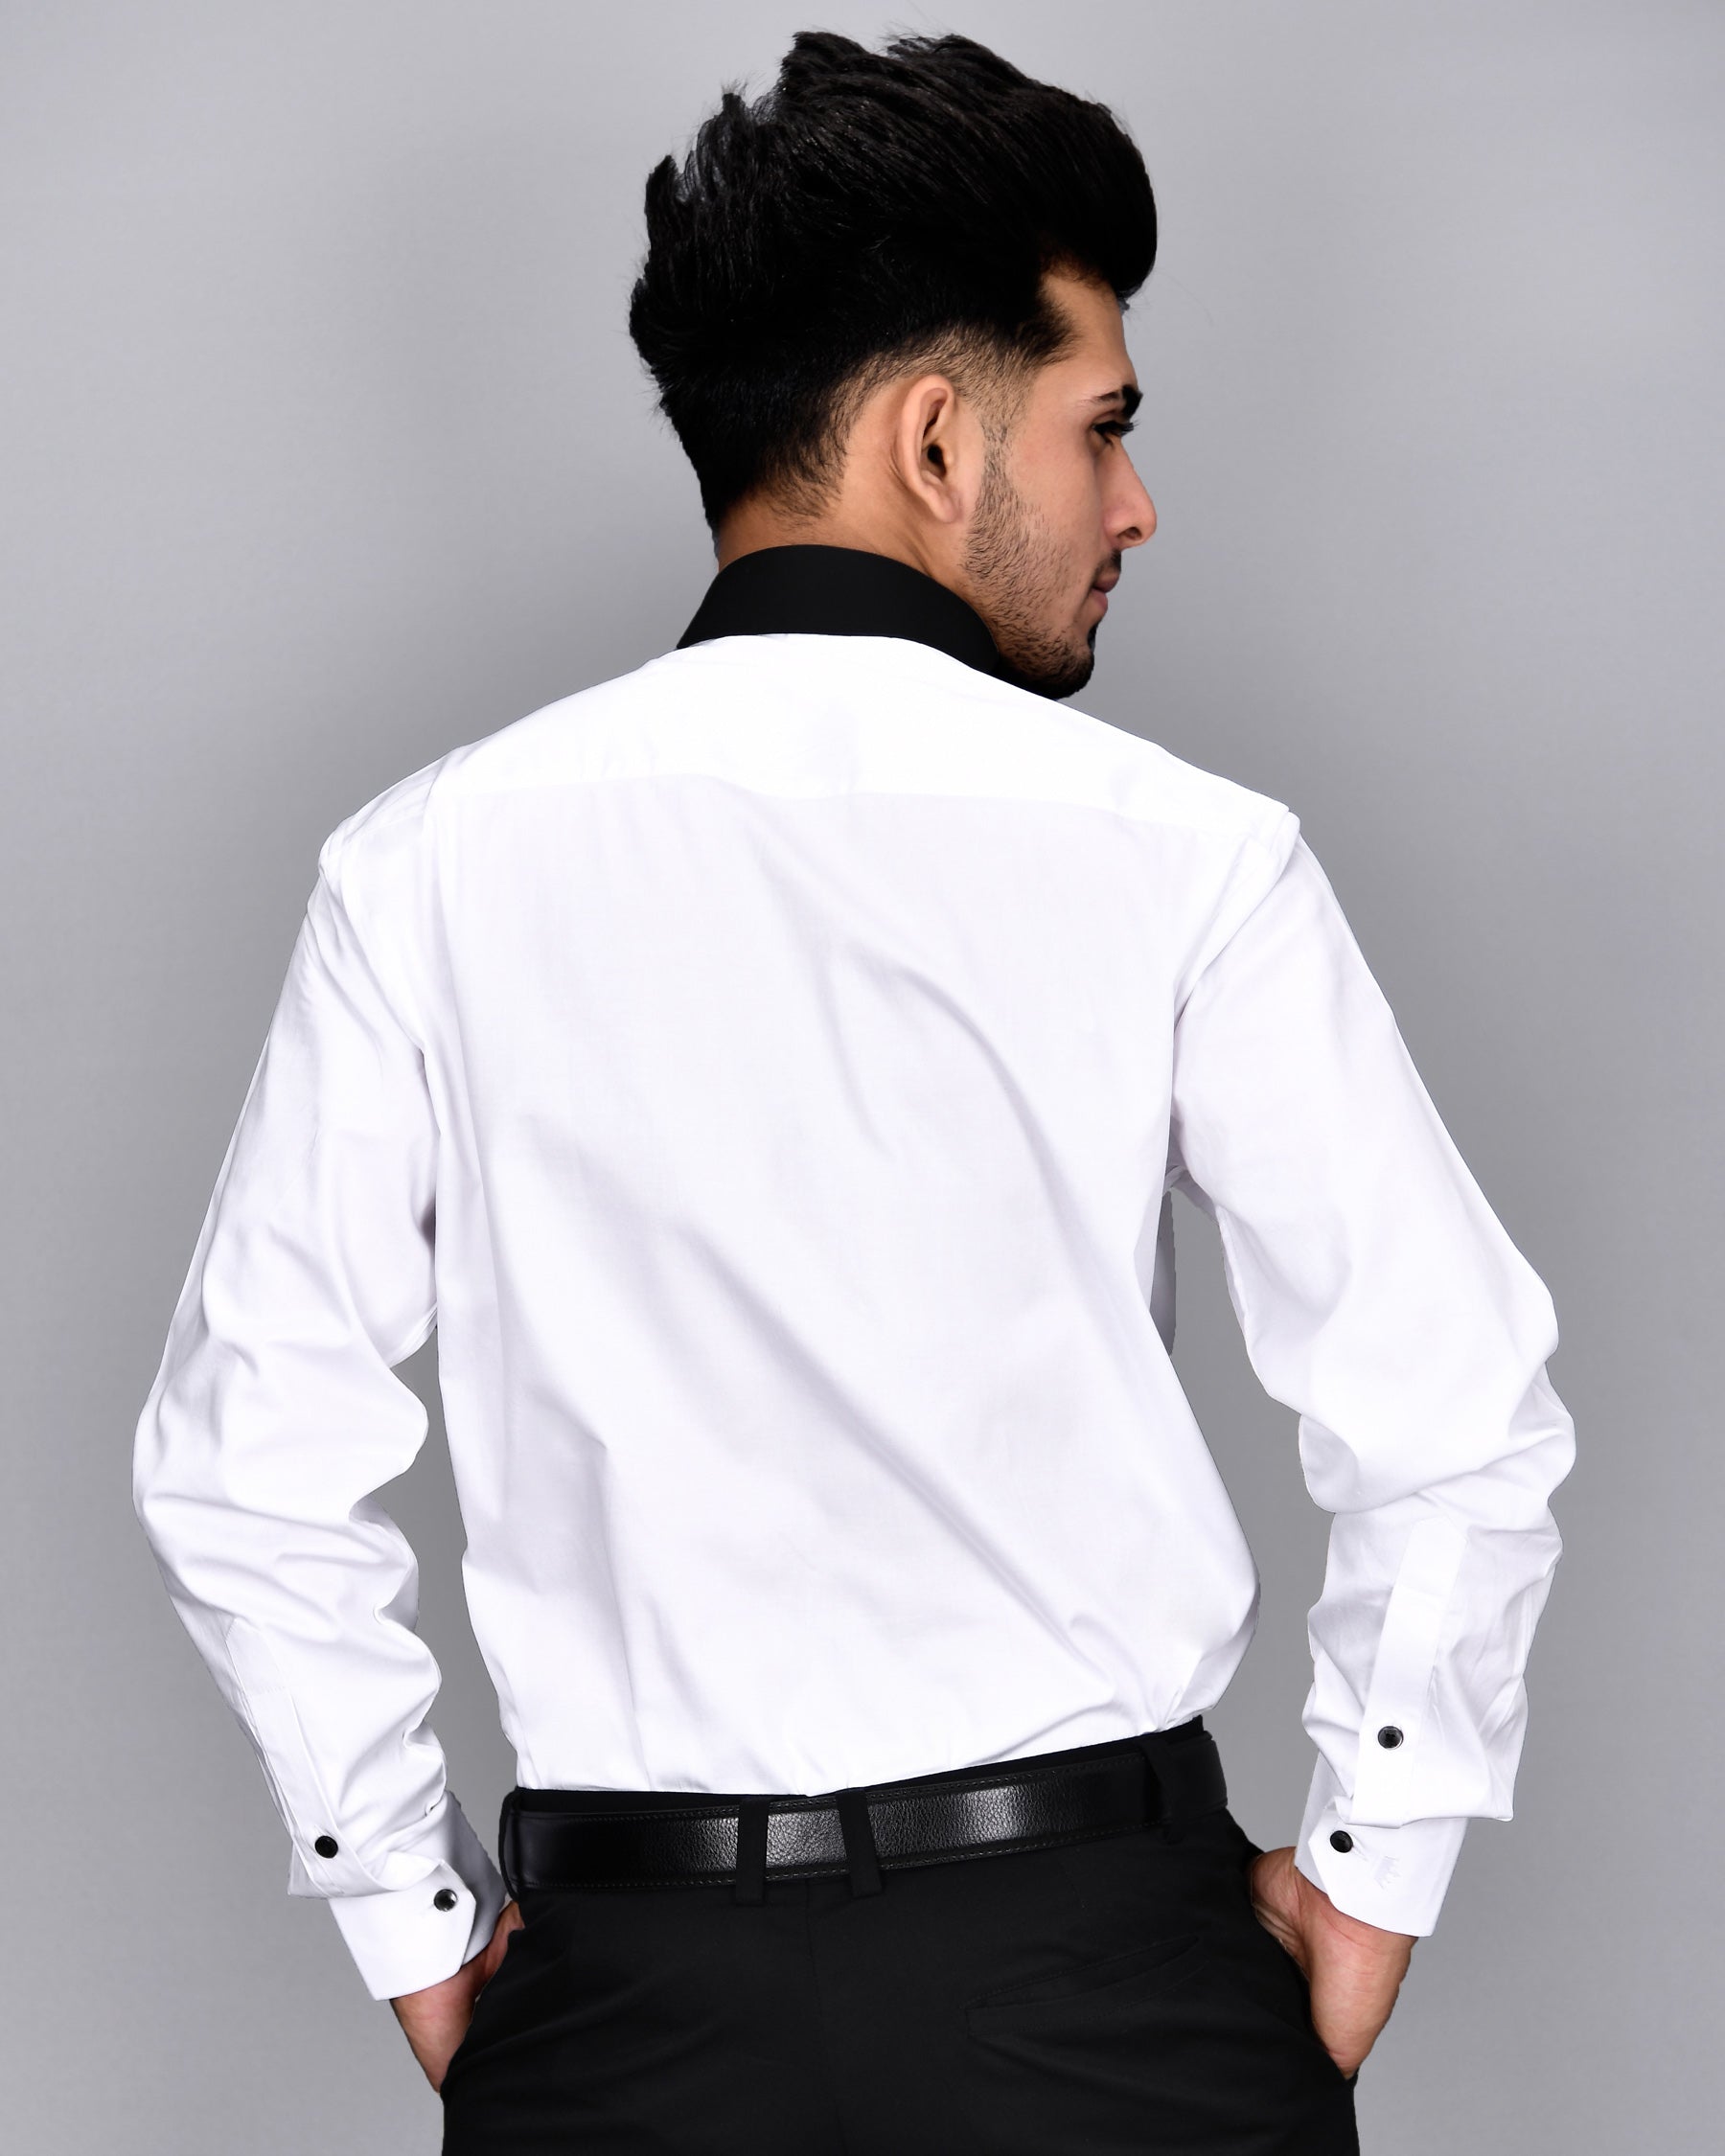 Bright White Subtle Sheen With Black Patch Giza Cotton Shirt 3084BLK-P15-38, 3084BLK-P15-H-38, 3084BLK-P15-39, 3084BLK-P15-H-39, 3084BLK-P15-40, 3084BLK-P15-H-40, 3084BLK-P15-42, 3084BLK-P15-H-42, 3084BLK-P15-44, 3084BLK-P15-H-44, 3084BLK-P15-46, 3084BLK-P15-H-46, 3084BLK-P15-48, 3084BLK-P15-H-48, 3084BLK-P15-50, 3084BLK-P15-H-50, 3084BLK-P15-52, 3084BLK-P15-H-52